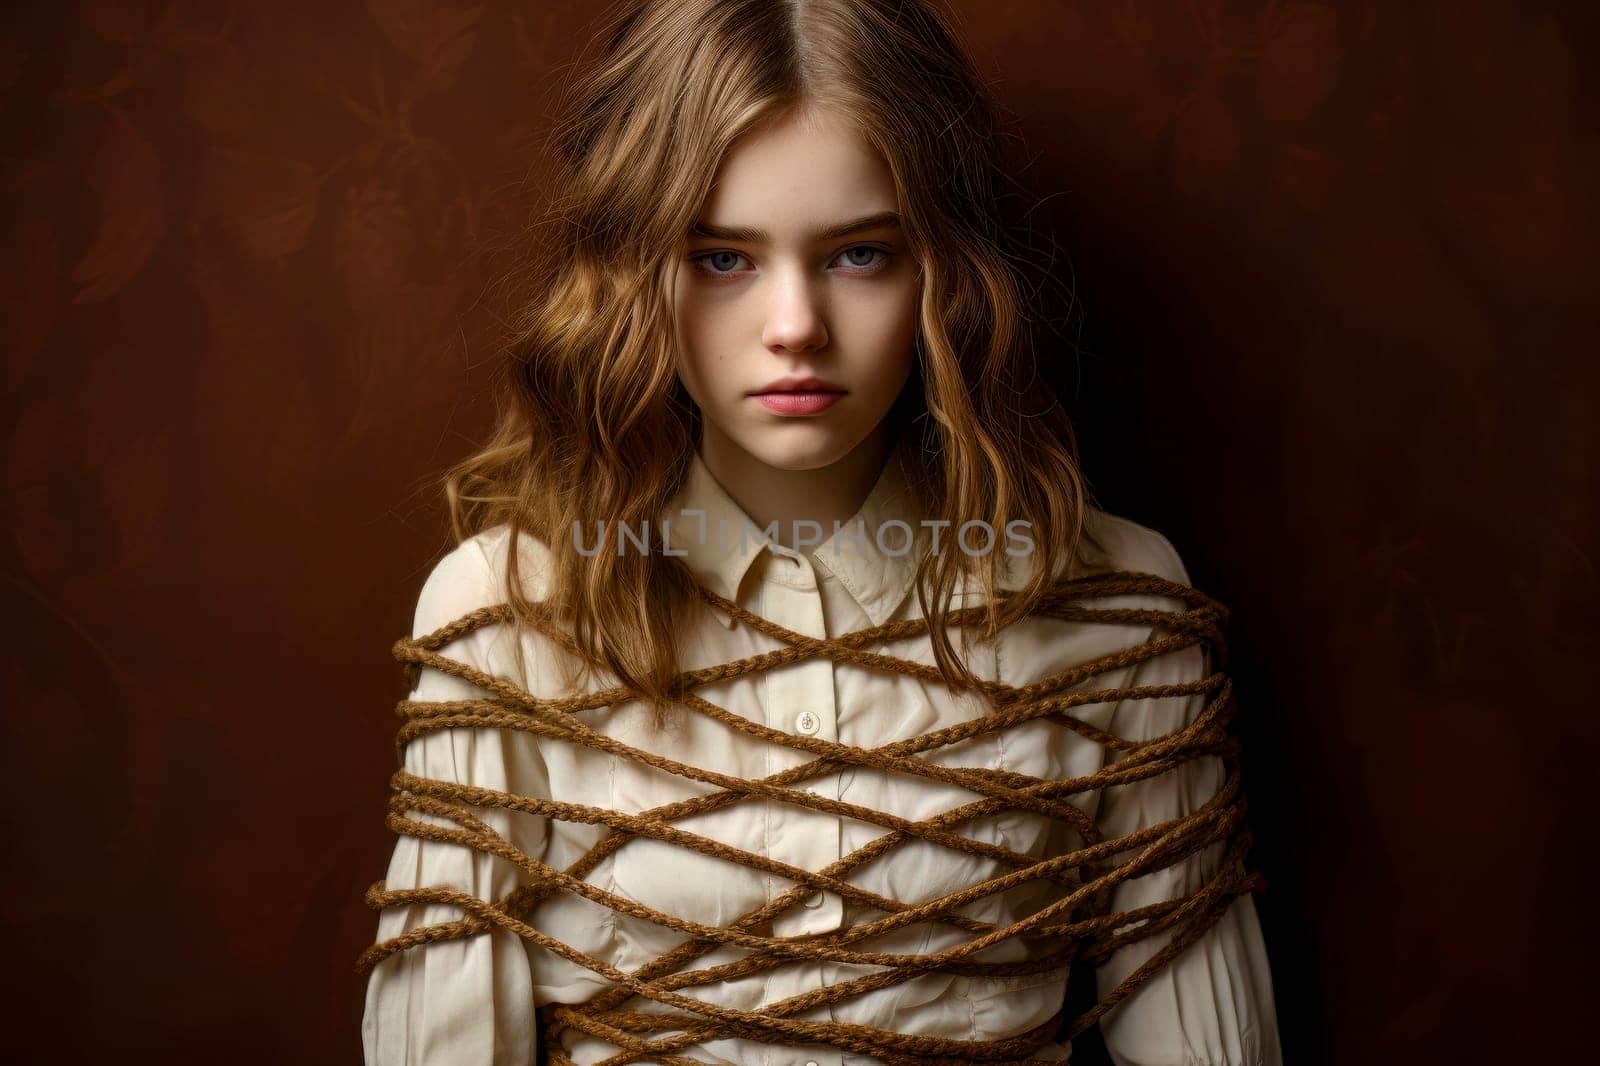 Sad Girl Restrained: Symbol of Suppressed Youth by pippocarlot